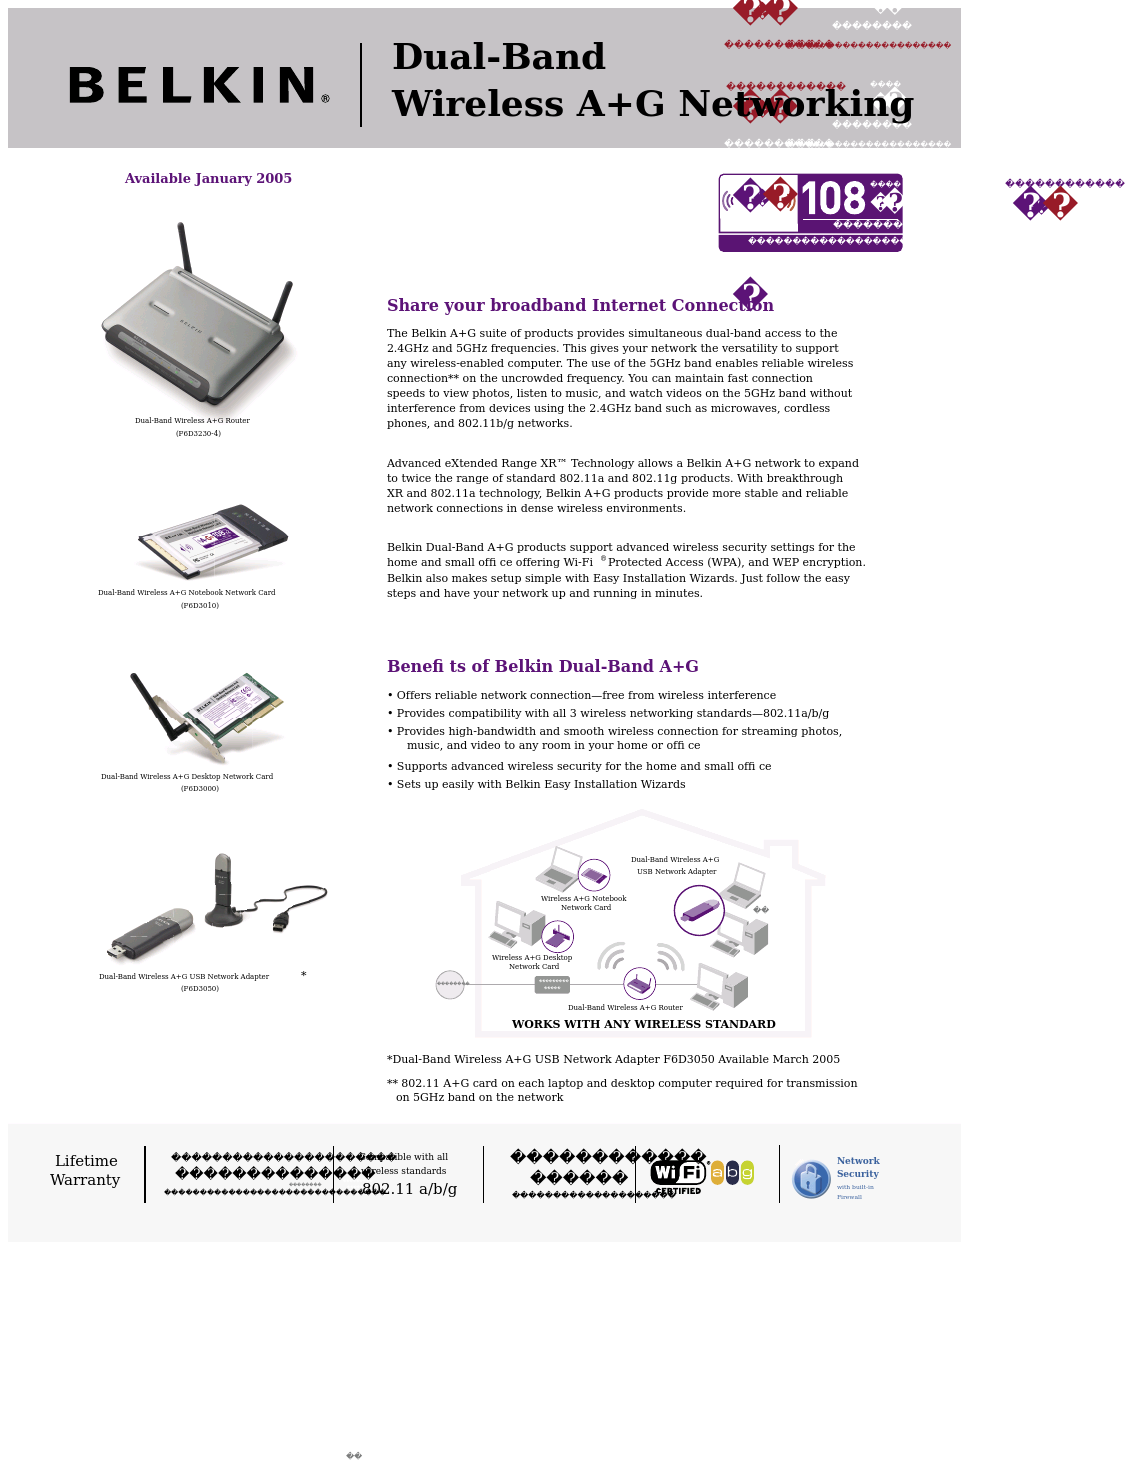 Dual-Band Wireless A+G USB Network Adapter F6D3050 (Page 1)